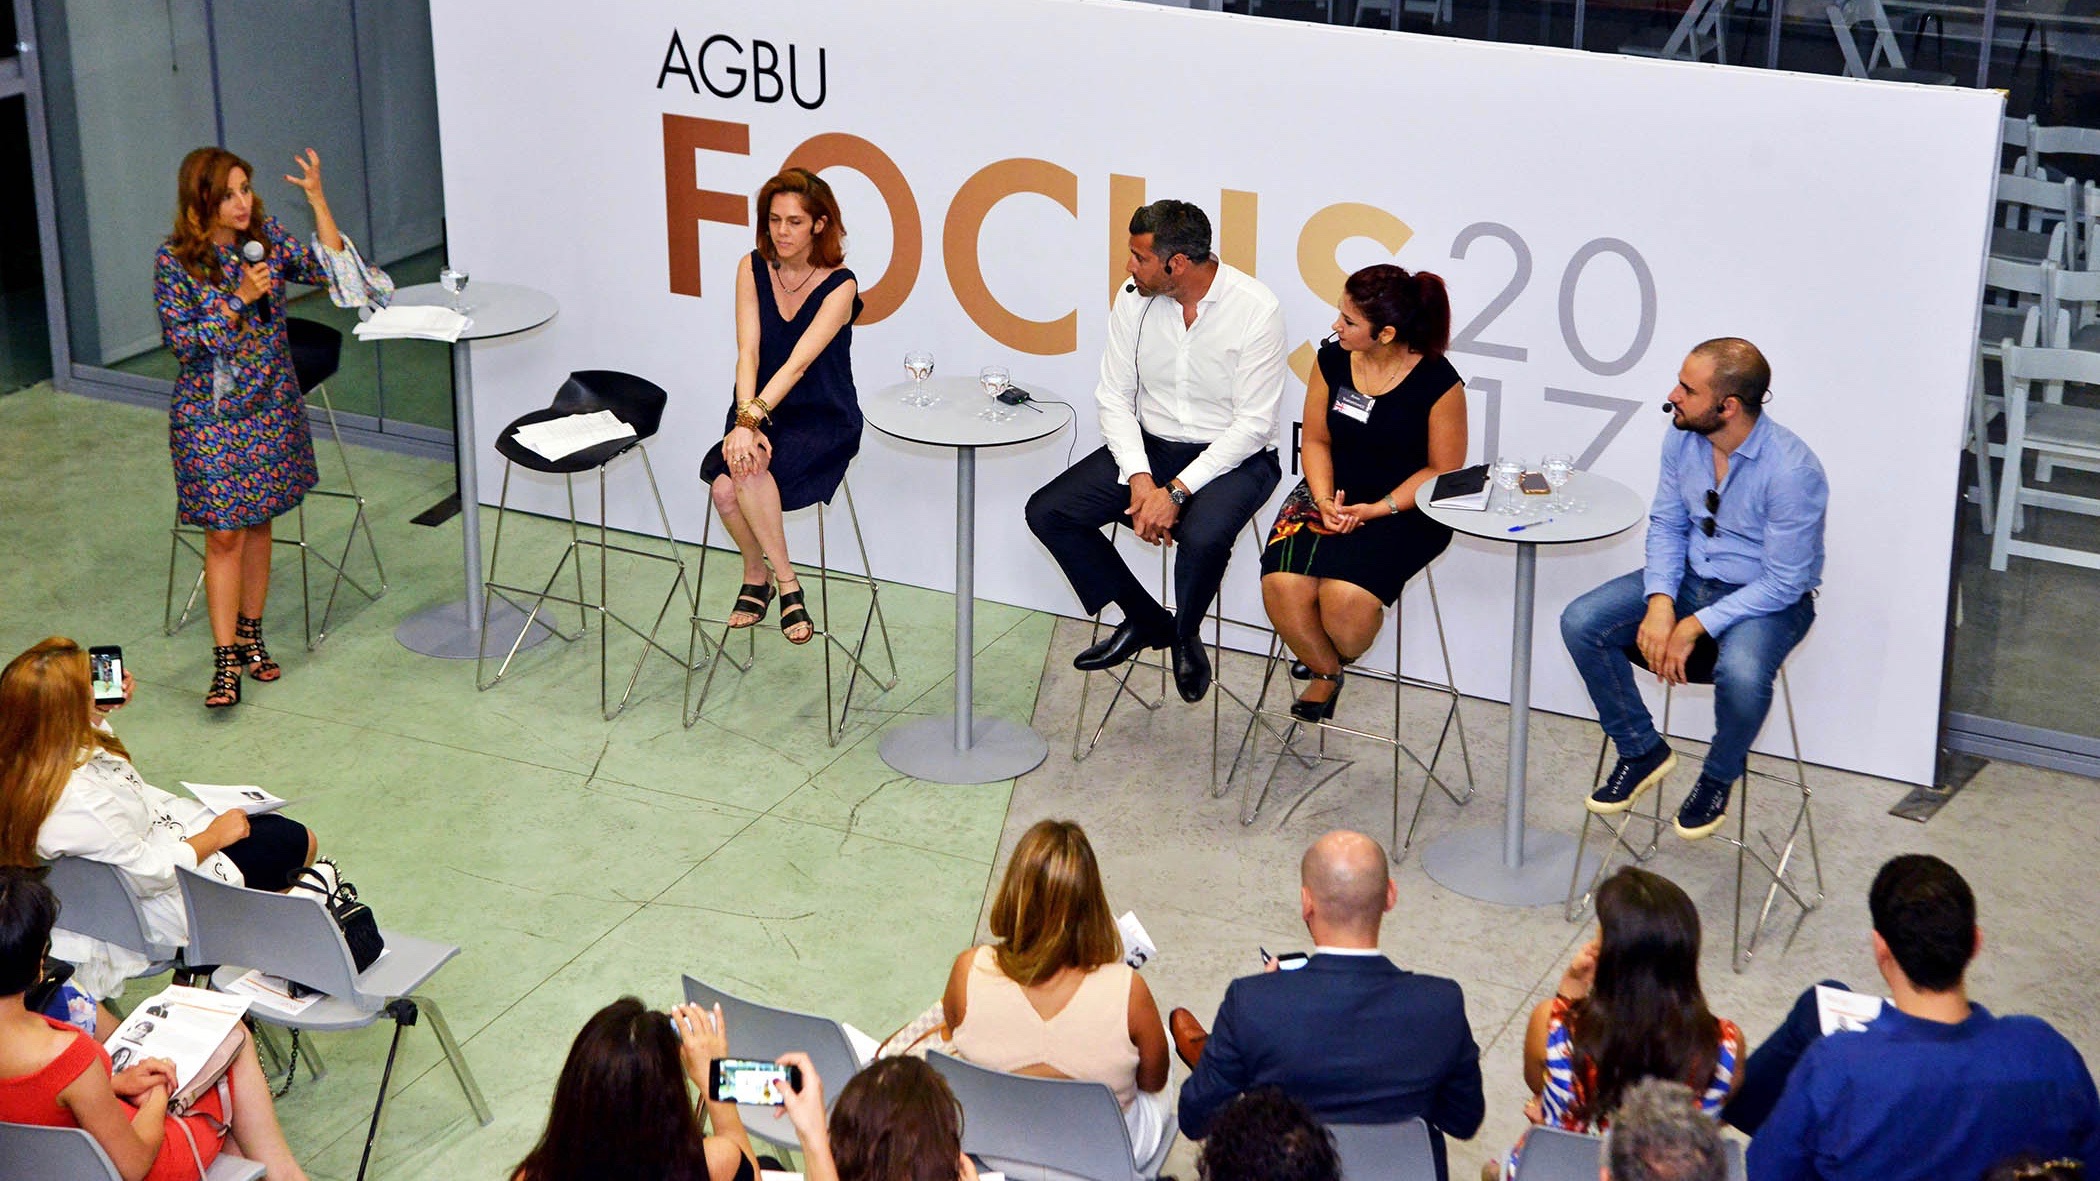 Over 400 Young Professionals Attend AGBU FOCUS 2017 in Beirut